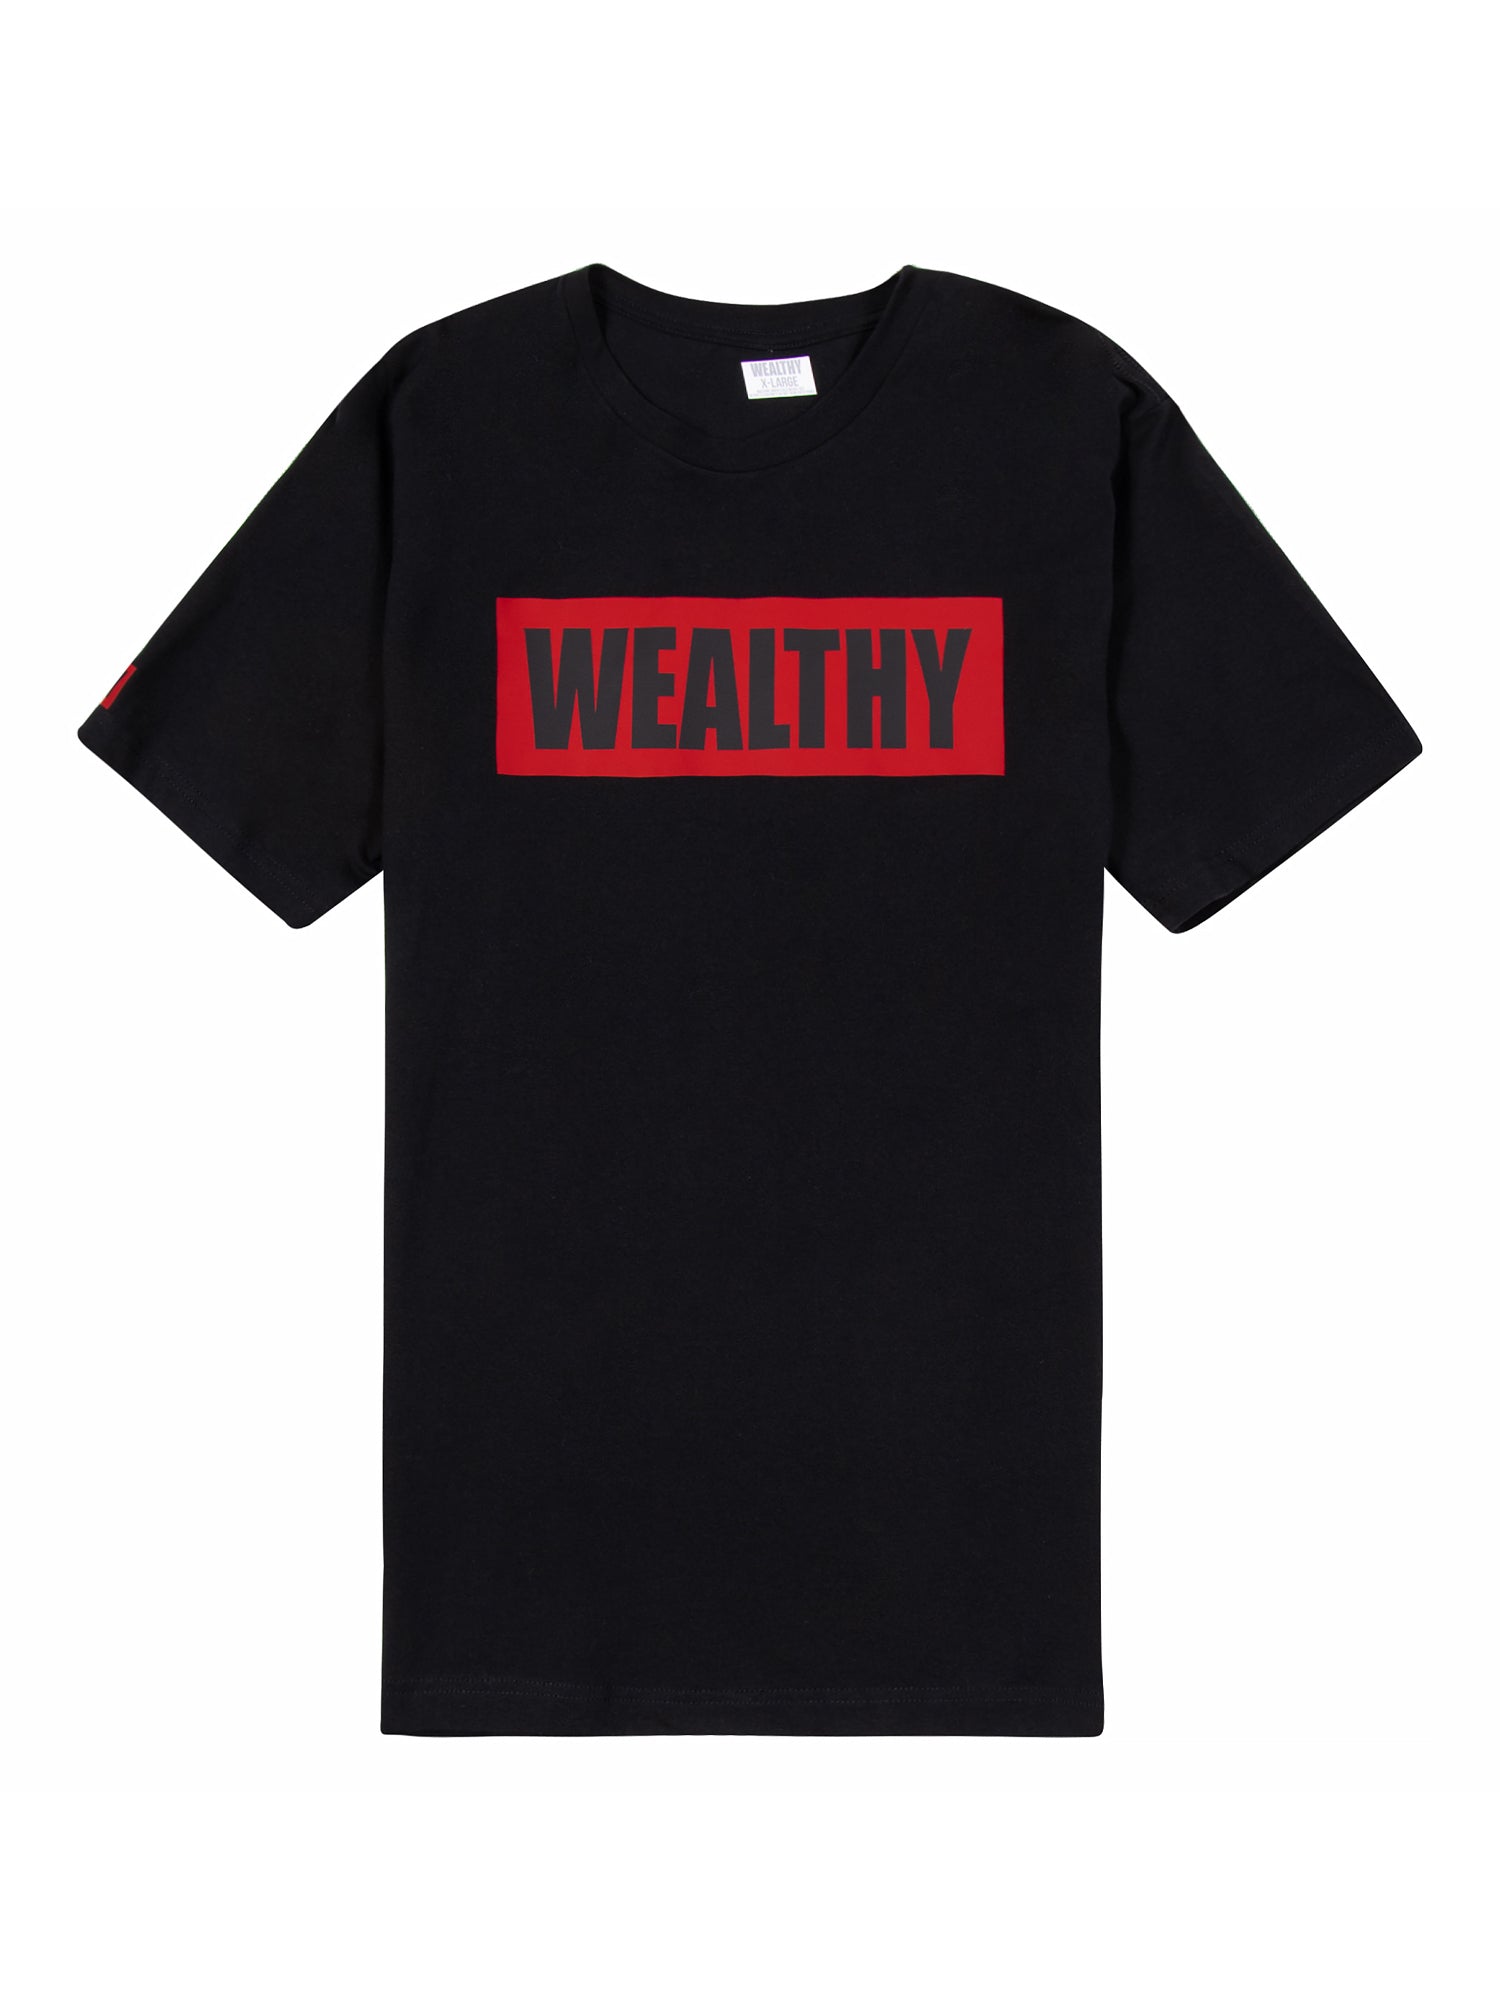 High Off Life Trademark Tee (Red)